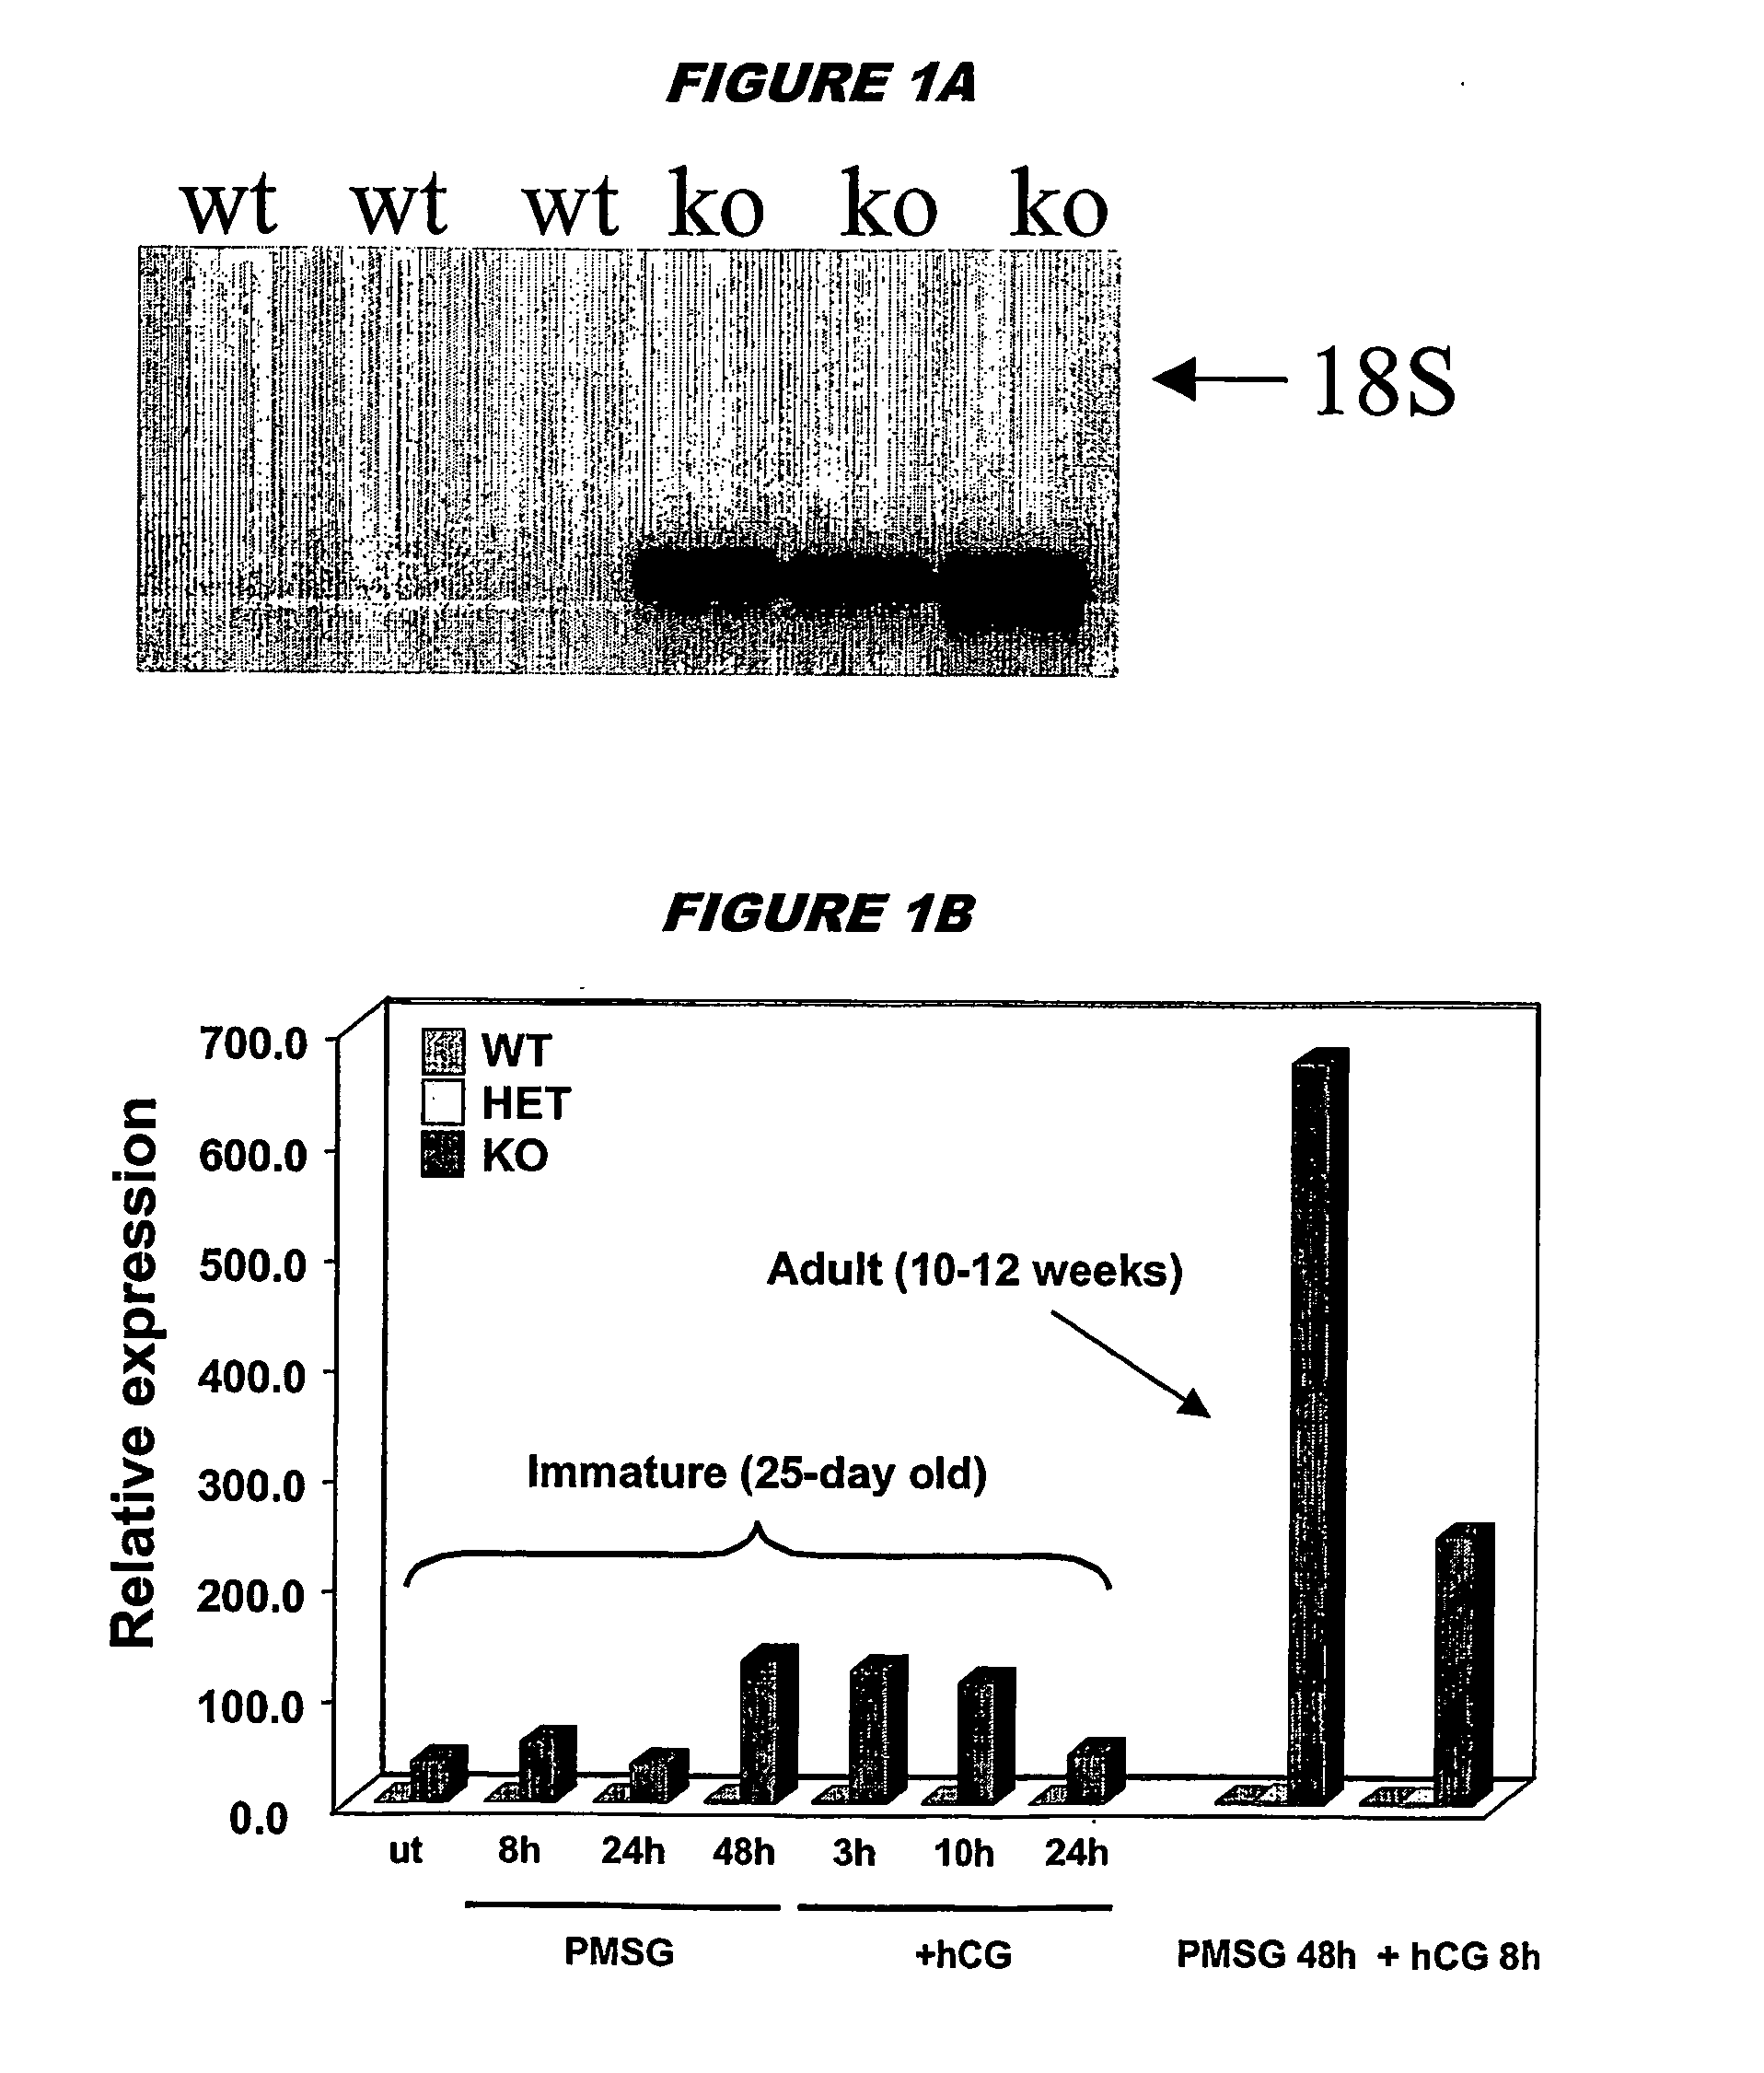 Screening for anti-ovulatory compounds